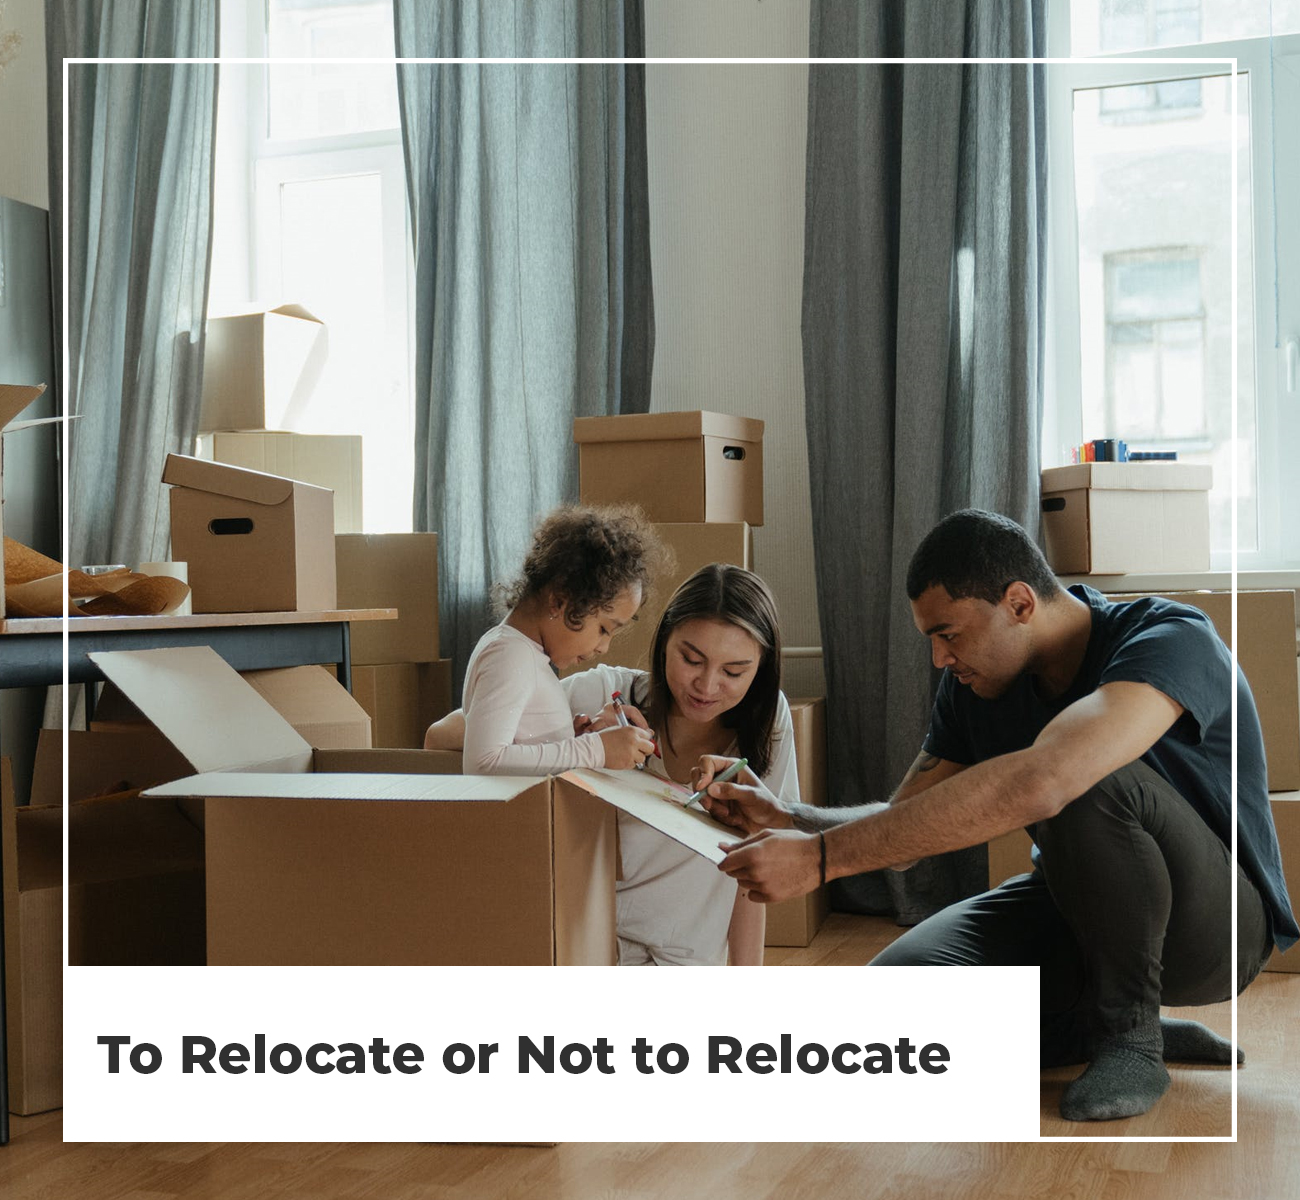 To Relocate or Not to Relocate